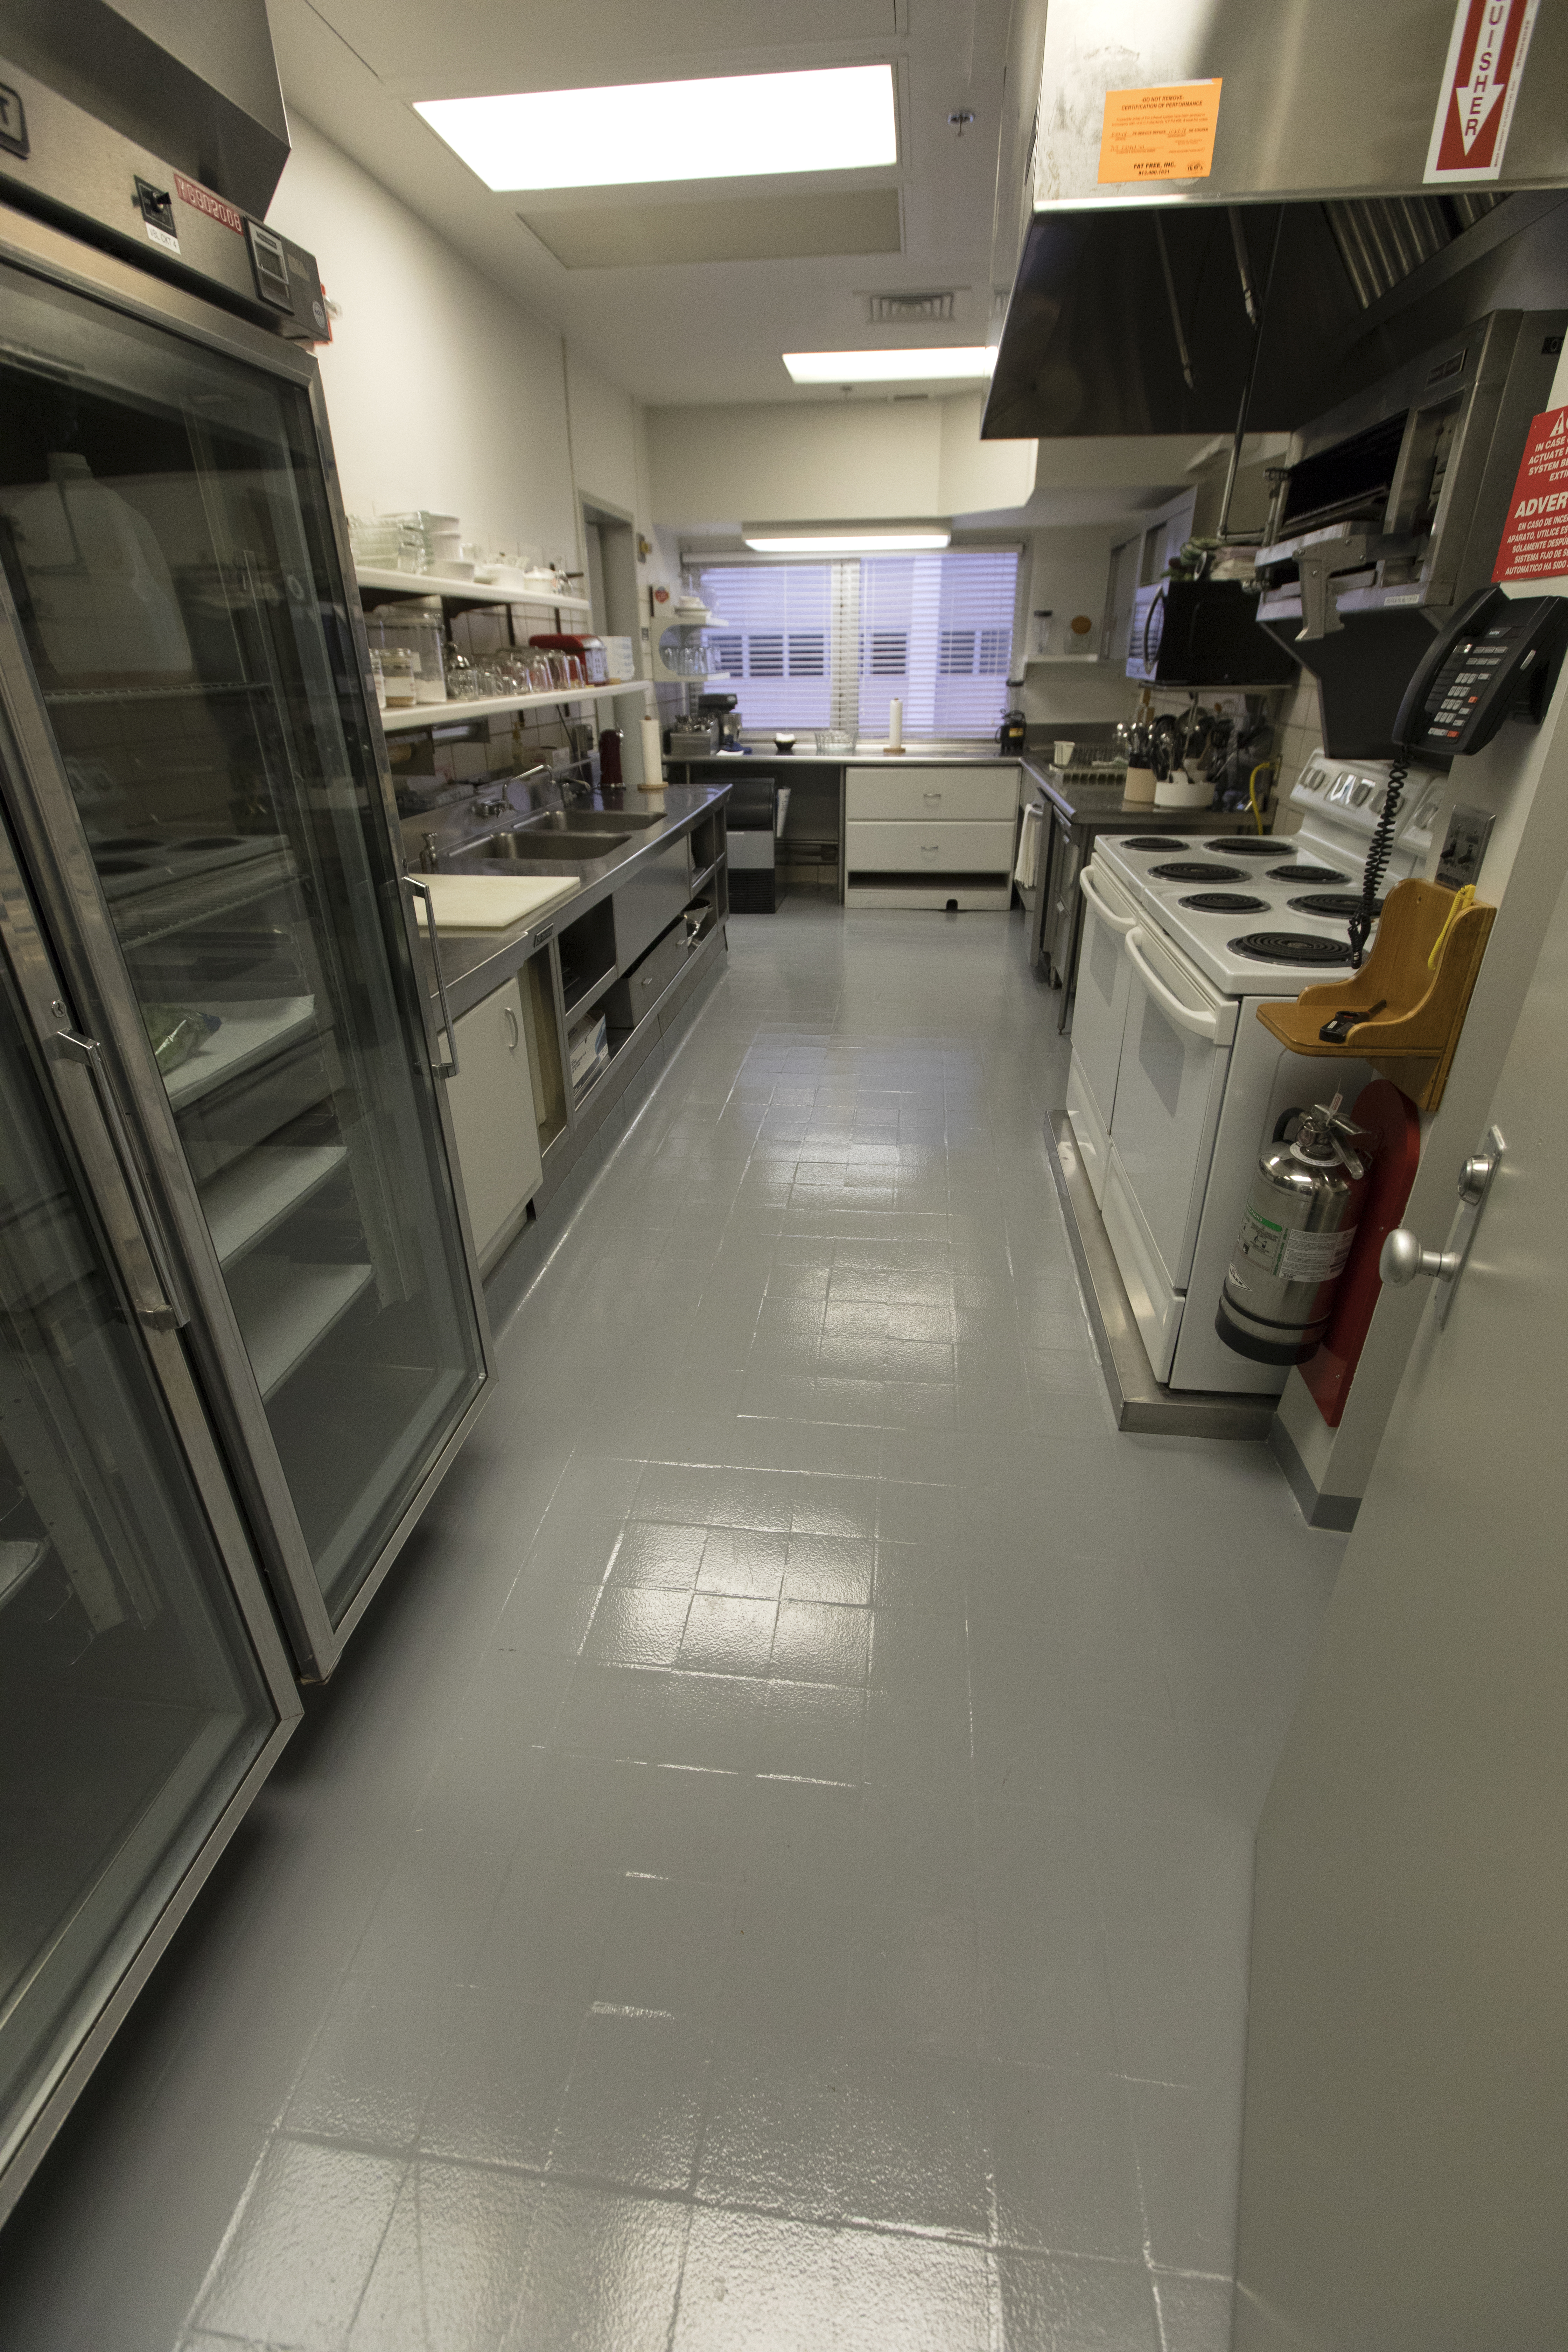 The kitchen in the astronaut crew quarters